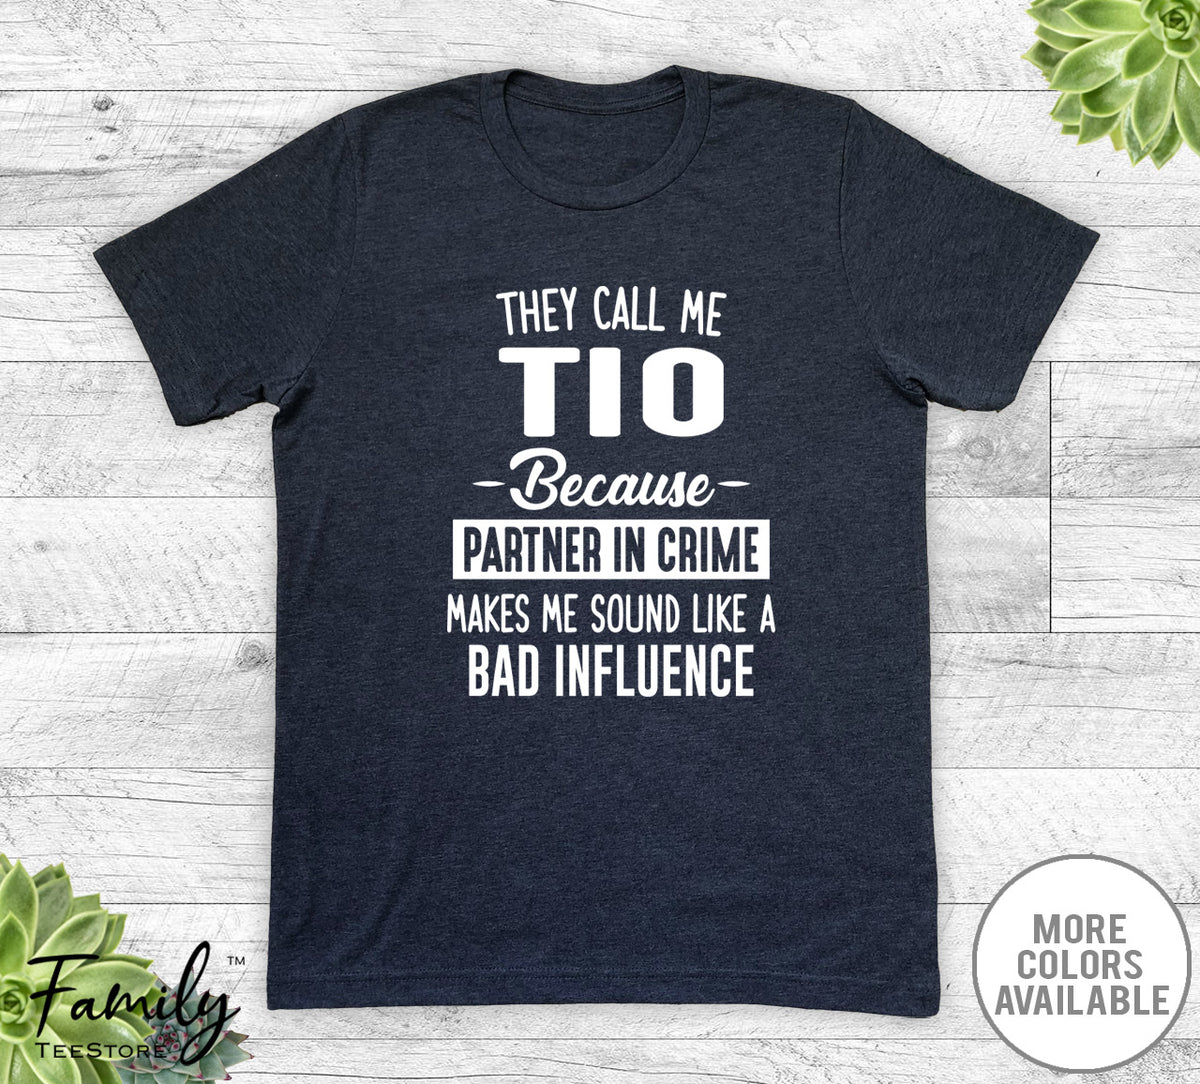 They Call Me Tio Because Partner In Crime... - Unisex T-shirt - Tio Shirt - Tio Gift